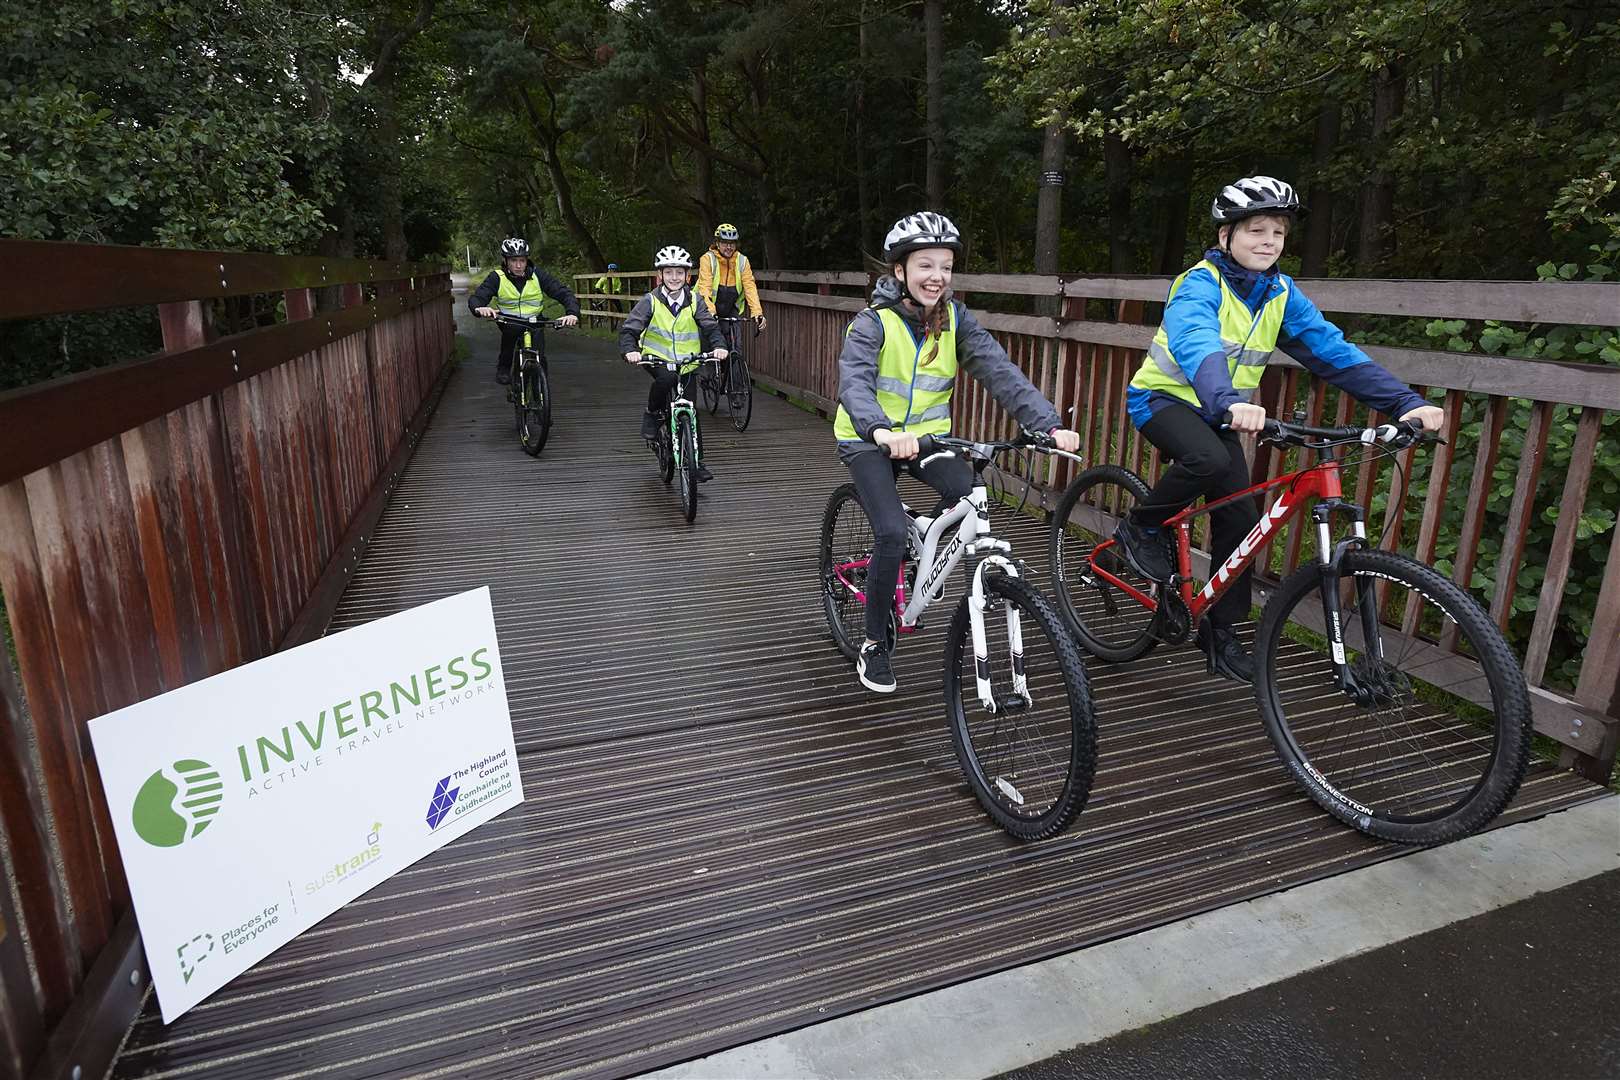 Pupils from Culloden Academy were among the first across the new bridge at Smithton.